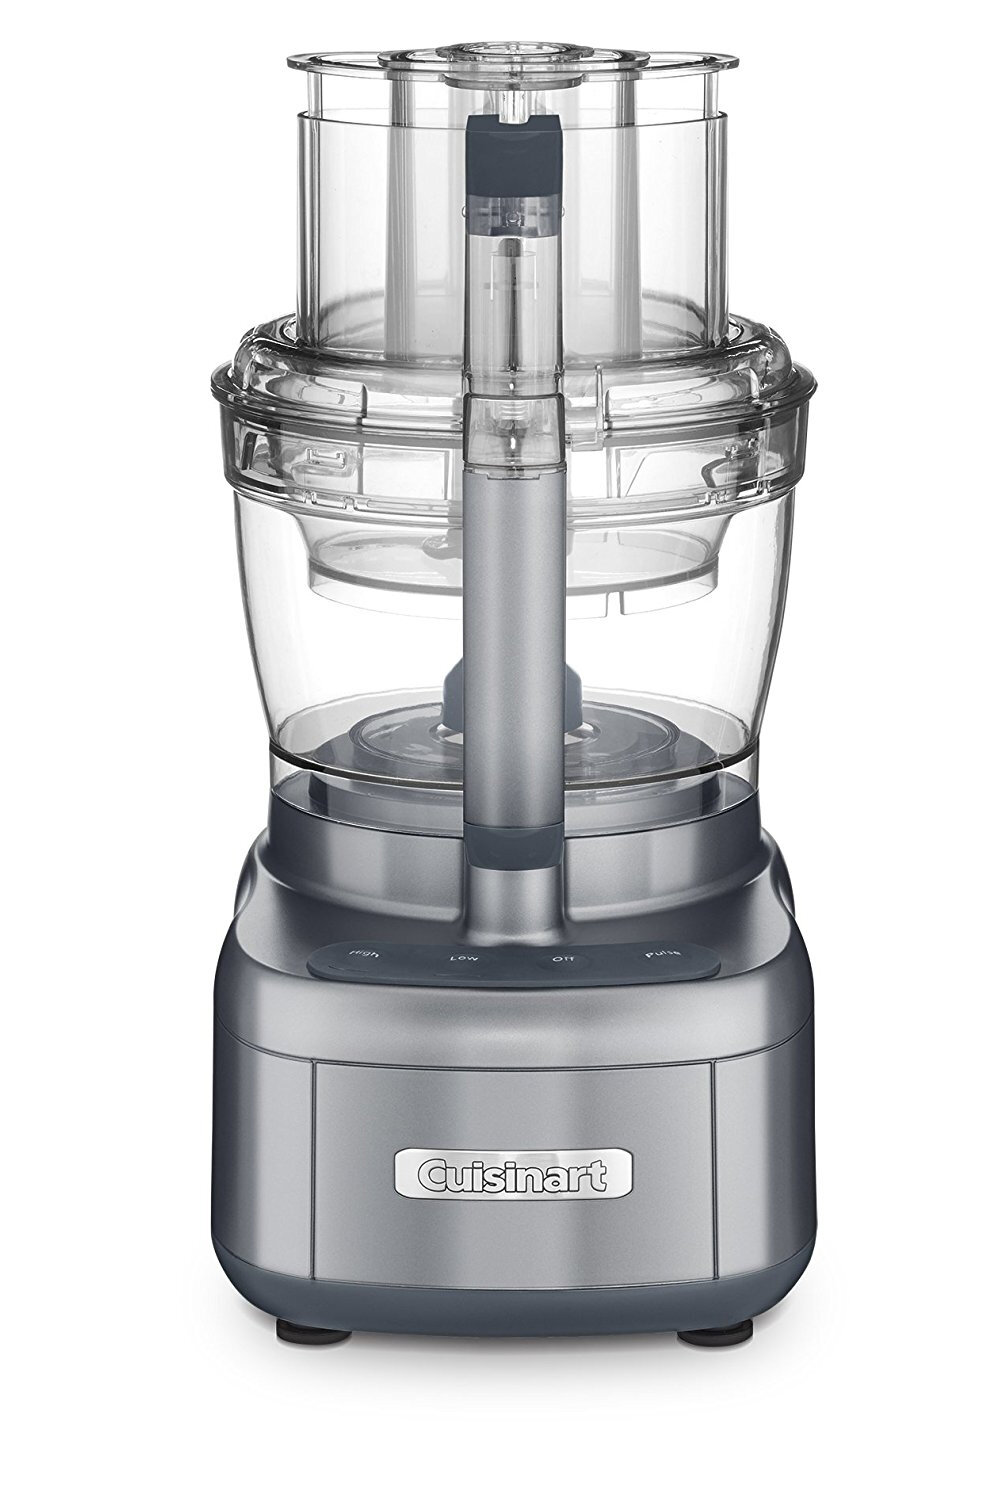 Cuisinart 14 Cup Food Processor, Includes Stainless Steel Standard